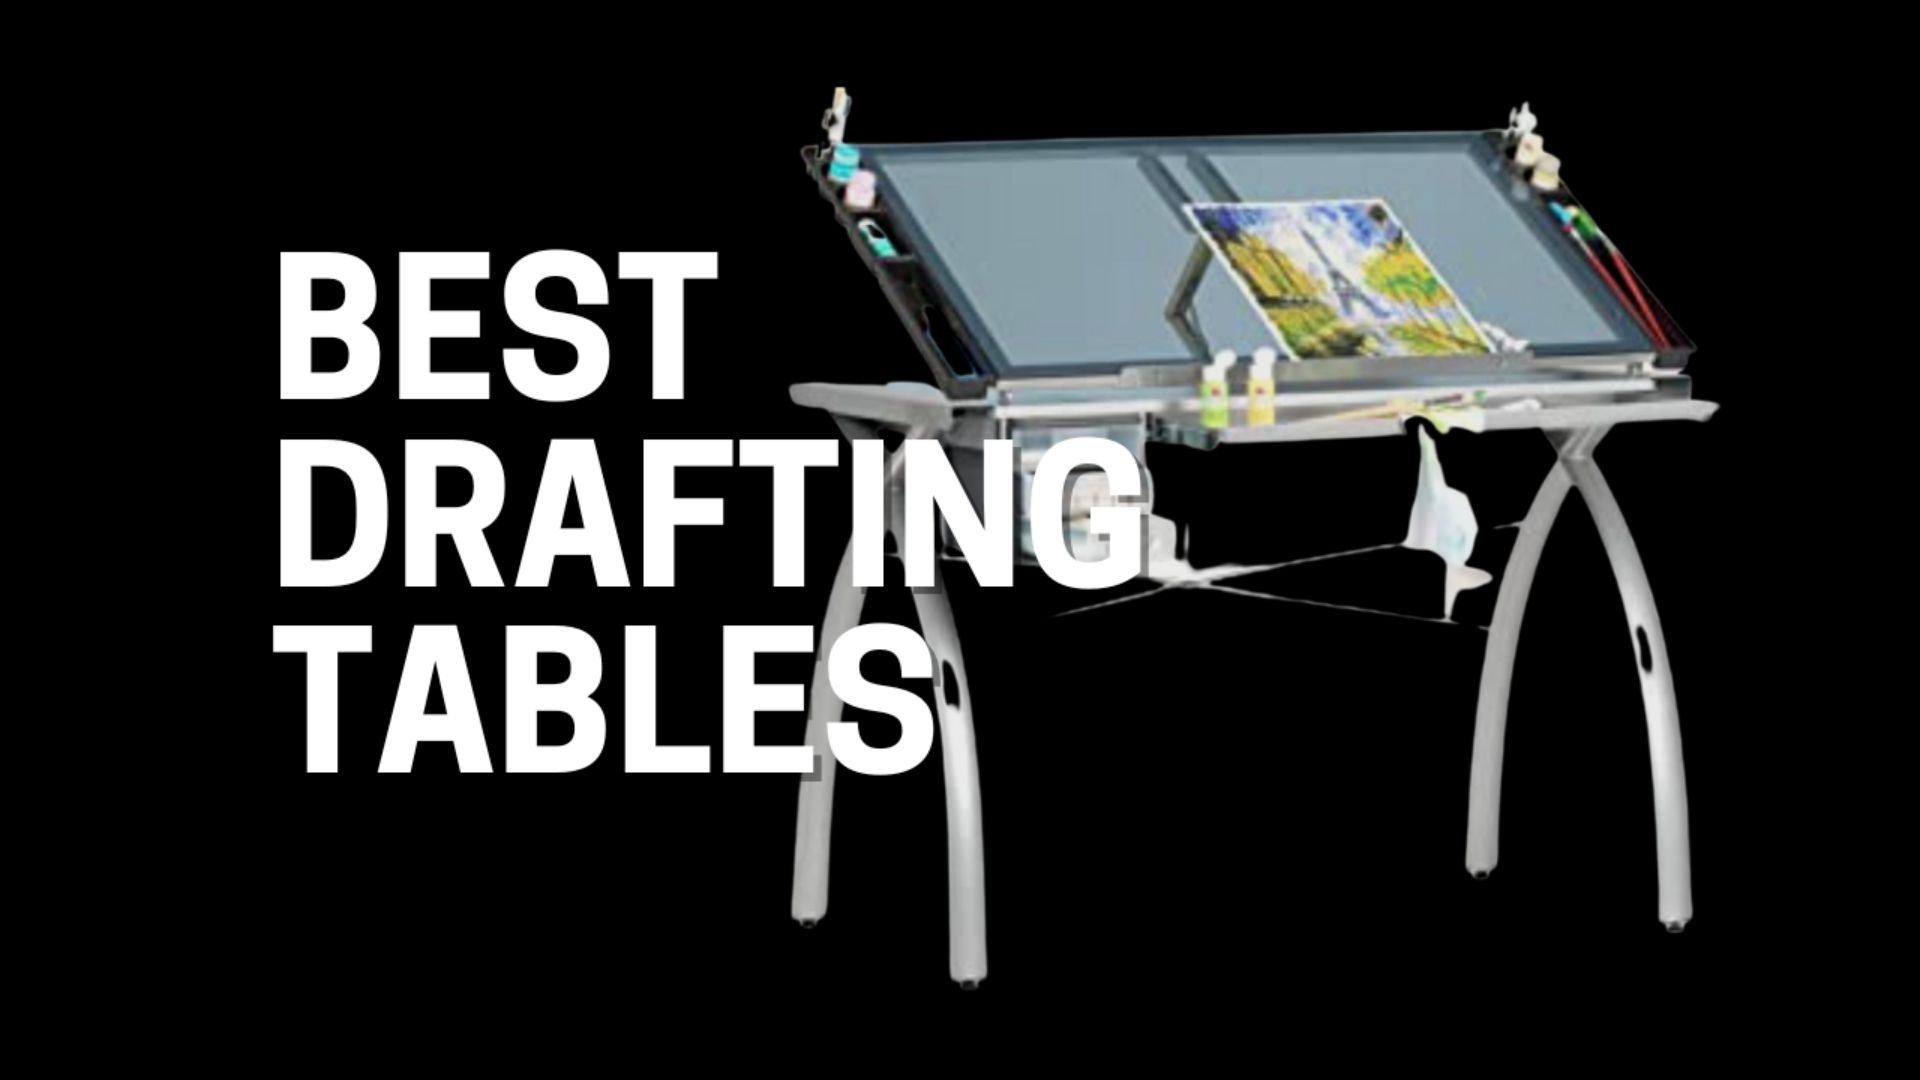 Best Drafting Tables